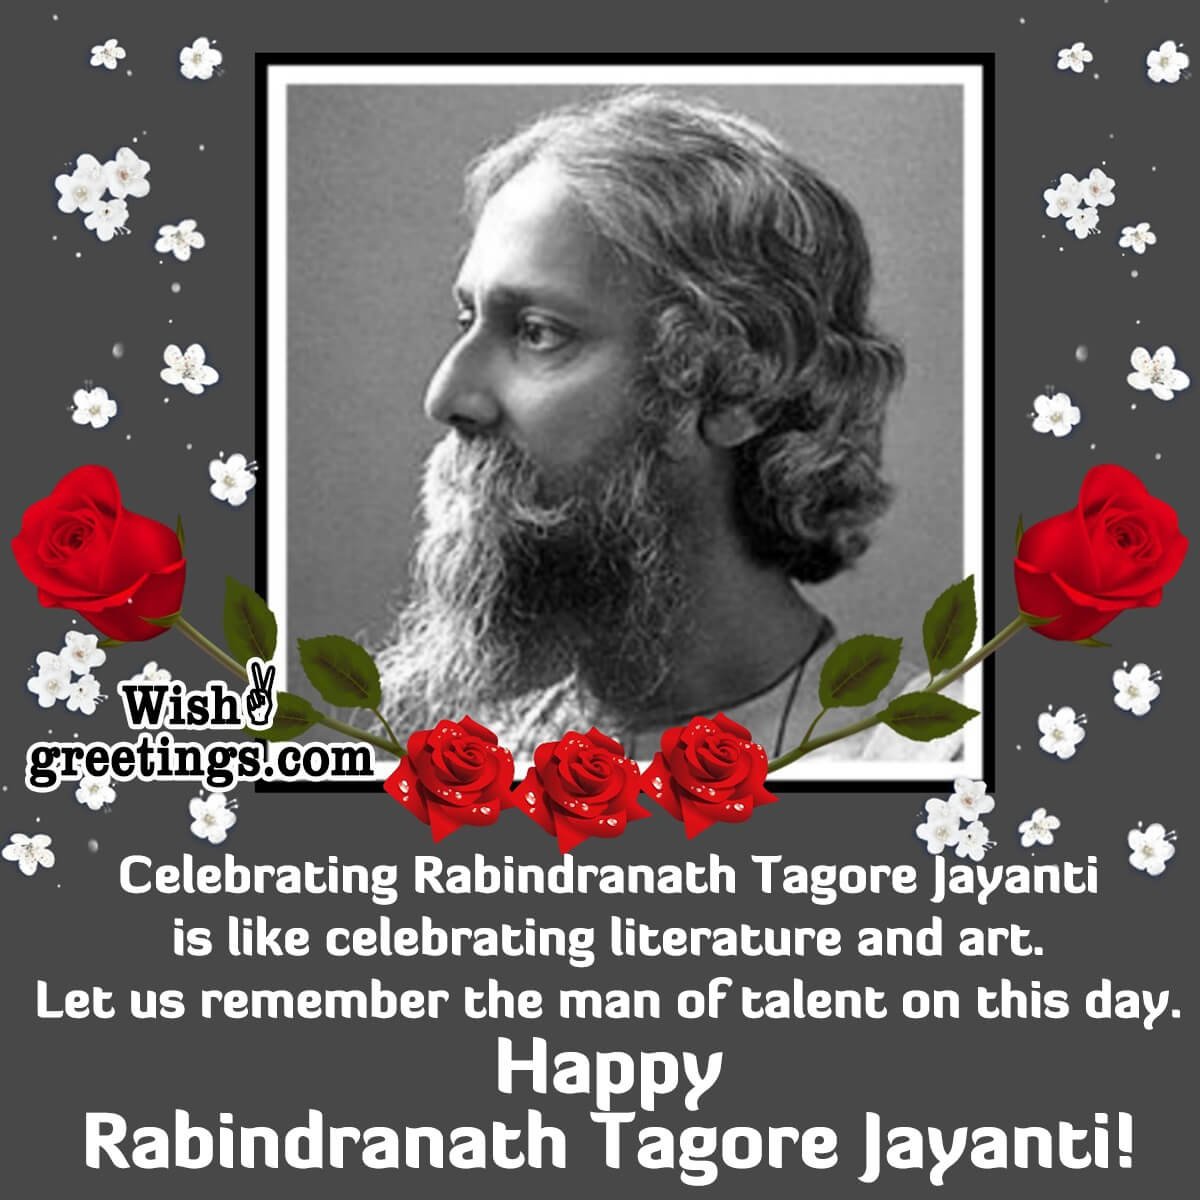 Rabindranath Tagore Jayanti Wishes Messages Wish Greetings